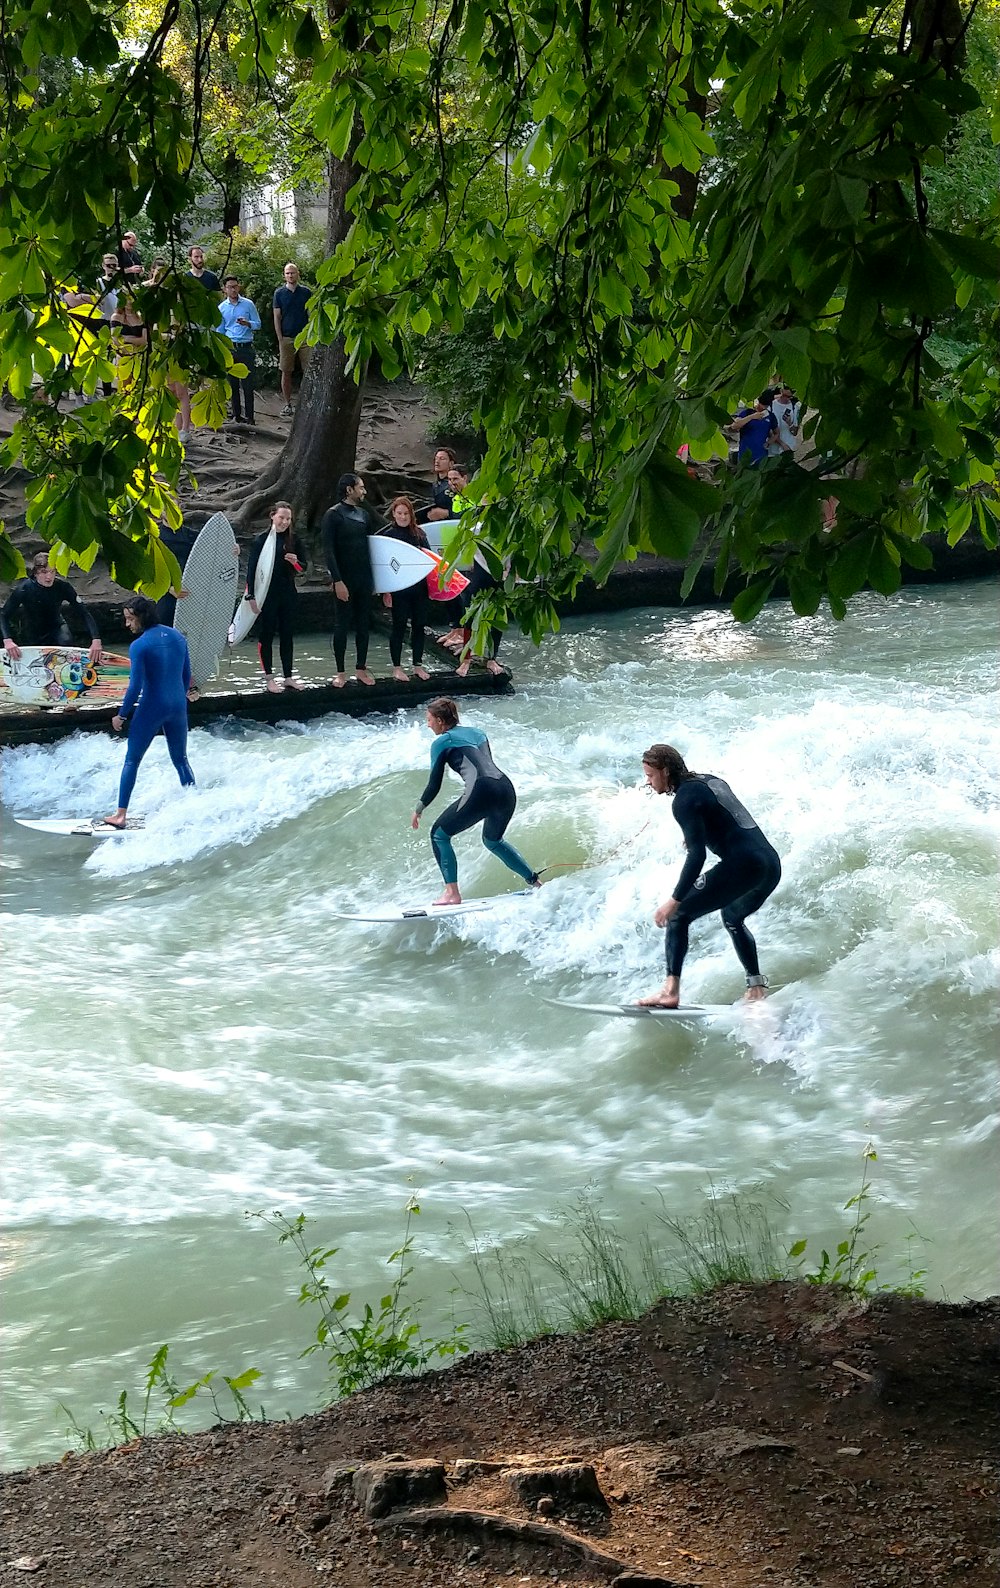 three person surfing in water during daytime